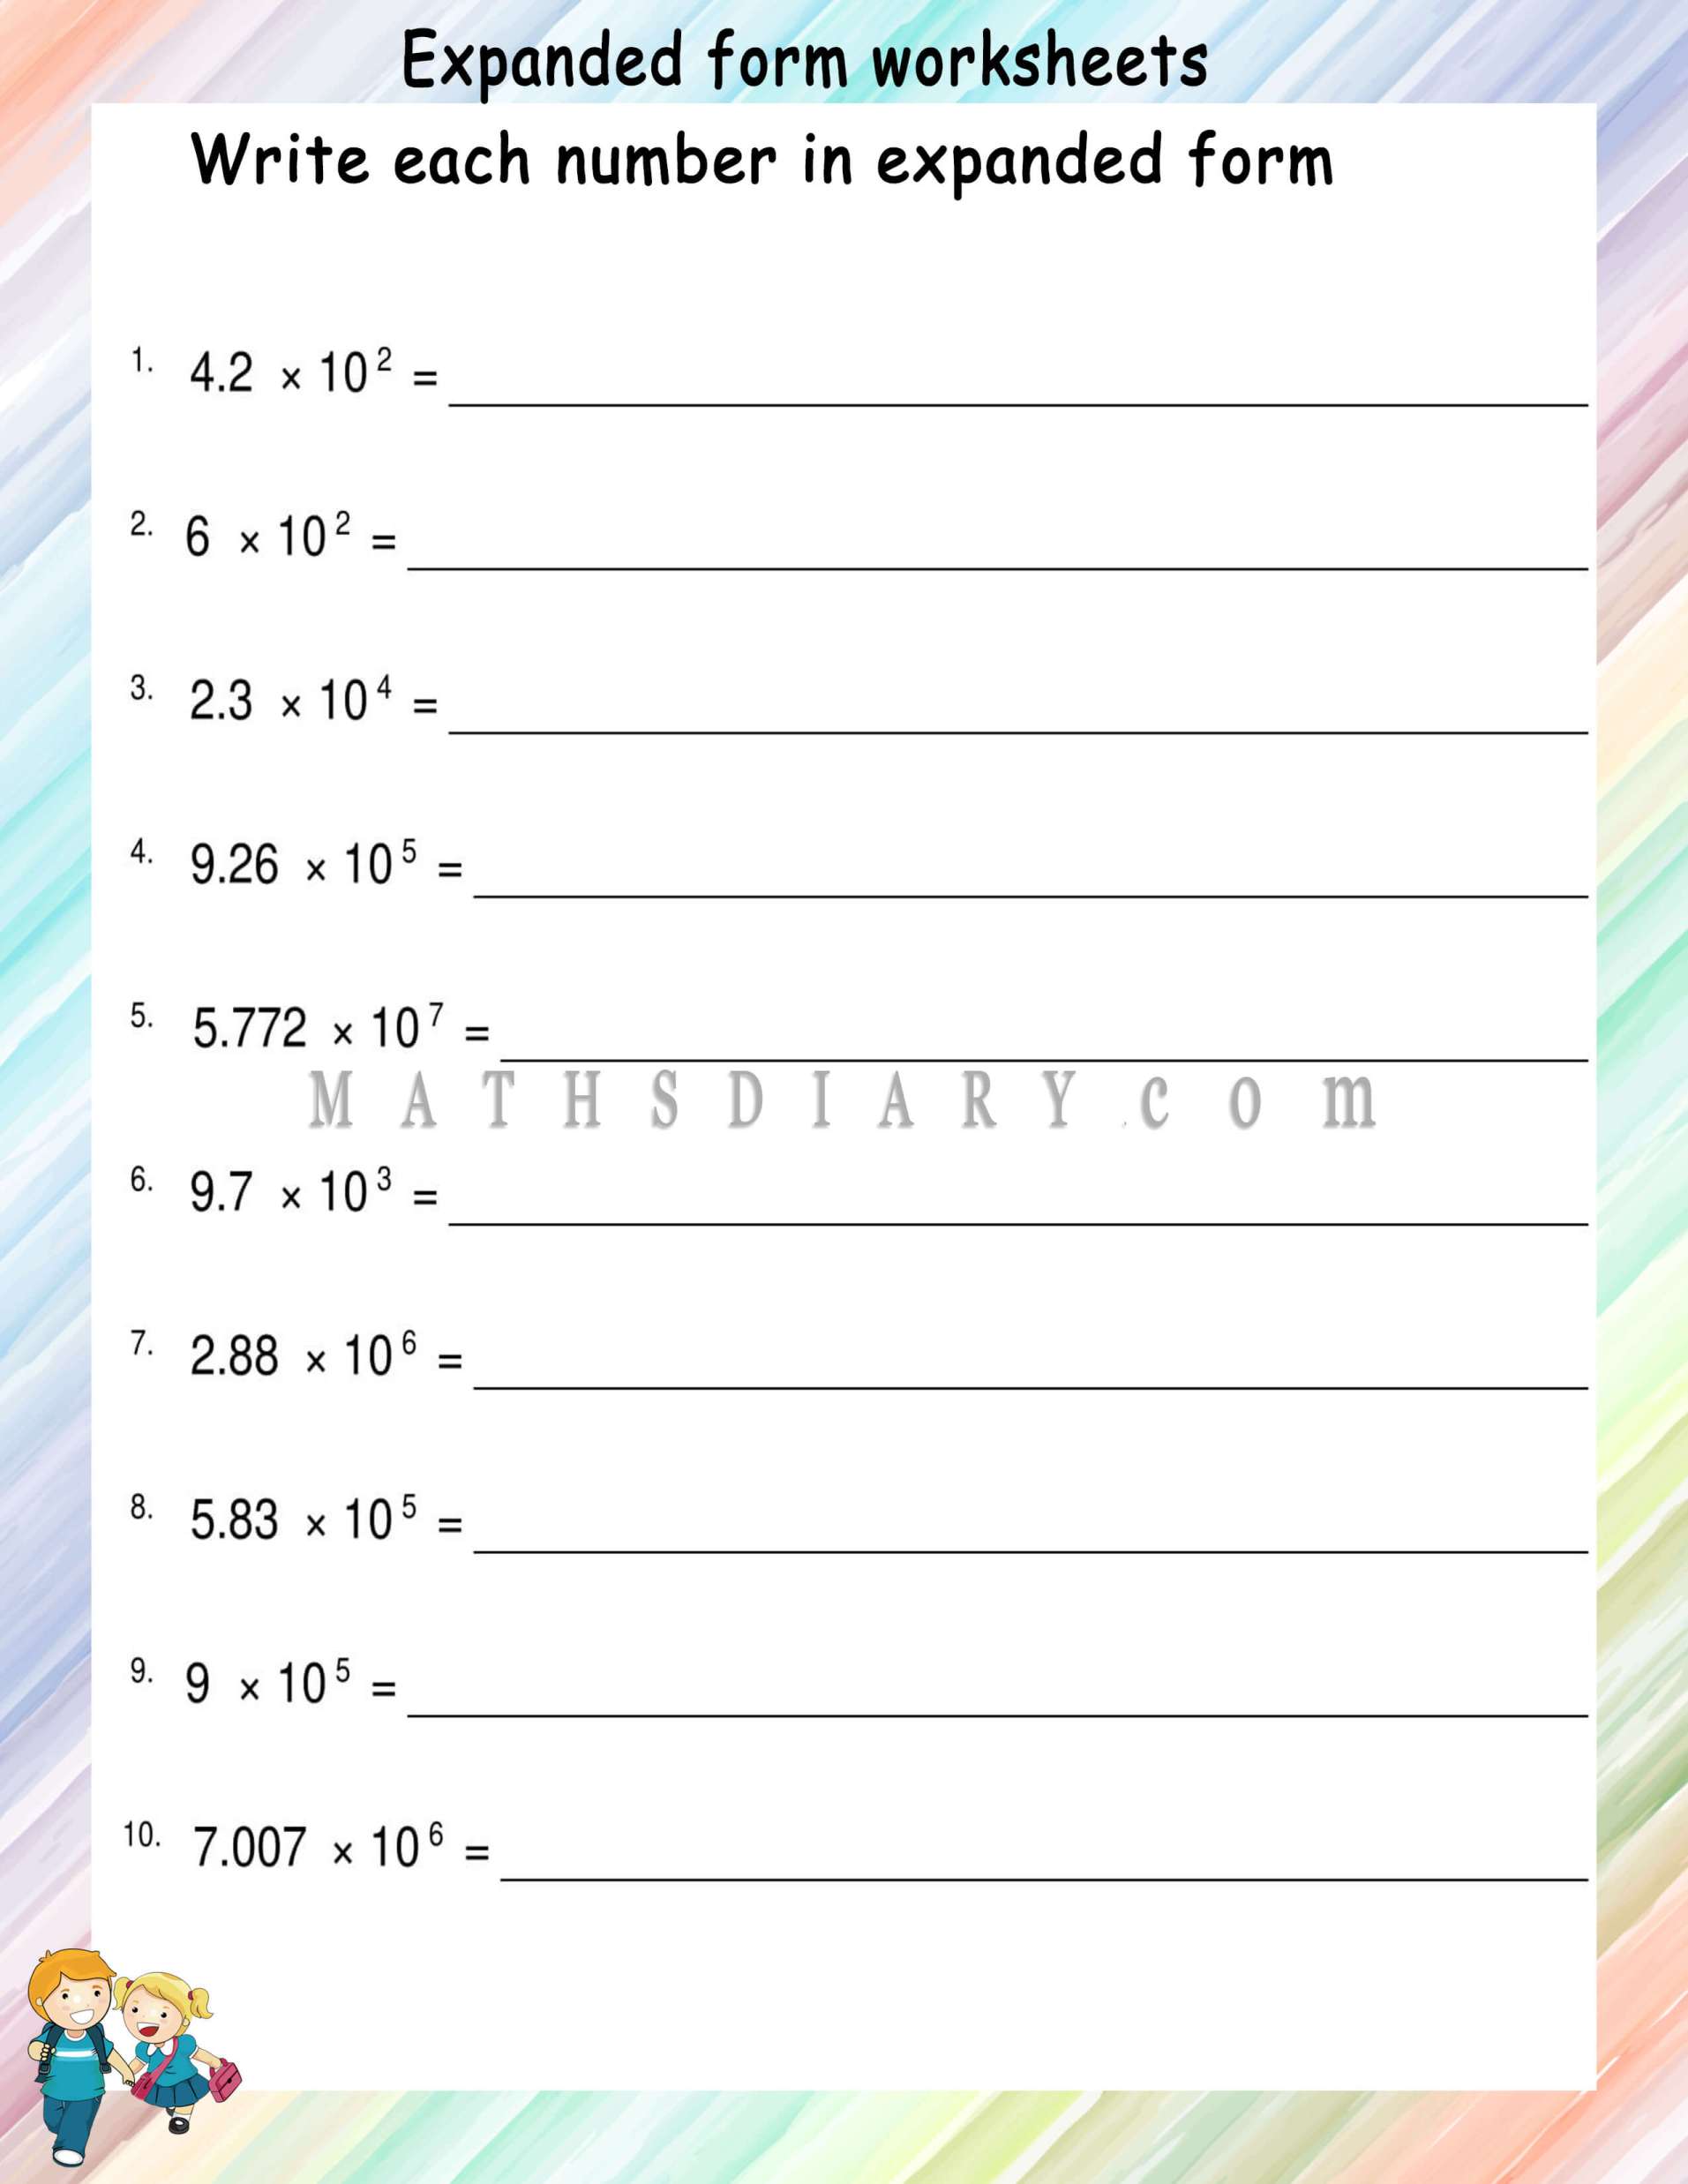 math-expanded-form-worksheets-for-grade-2-kidpid-place-value-expanding-numbers-worksheets